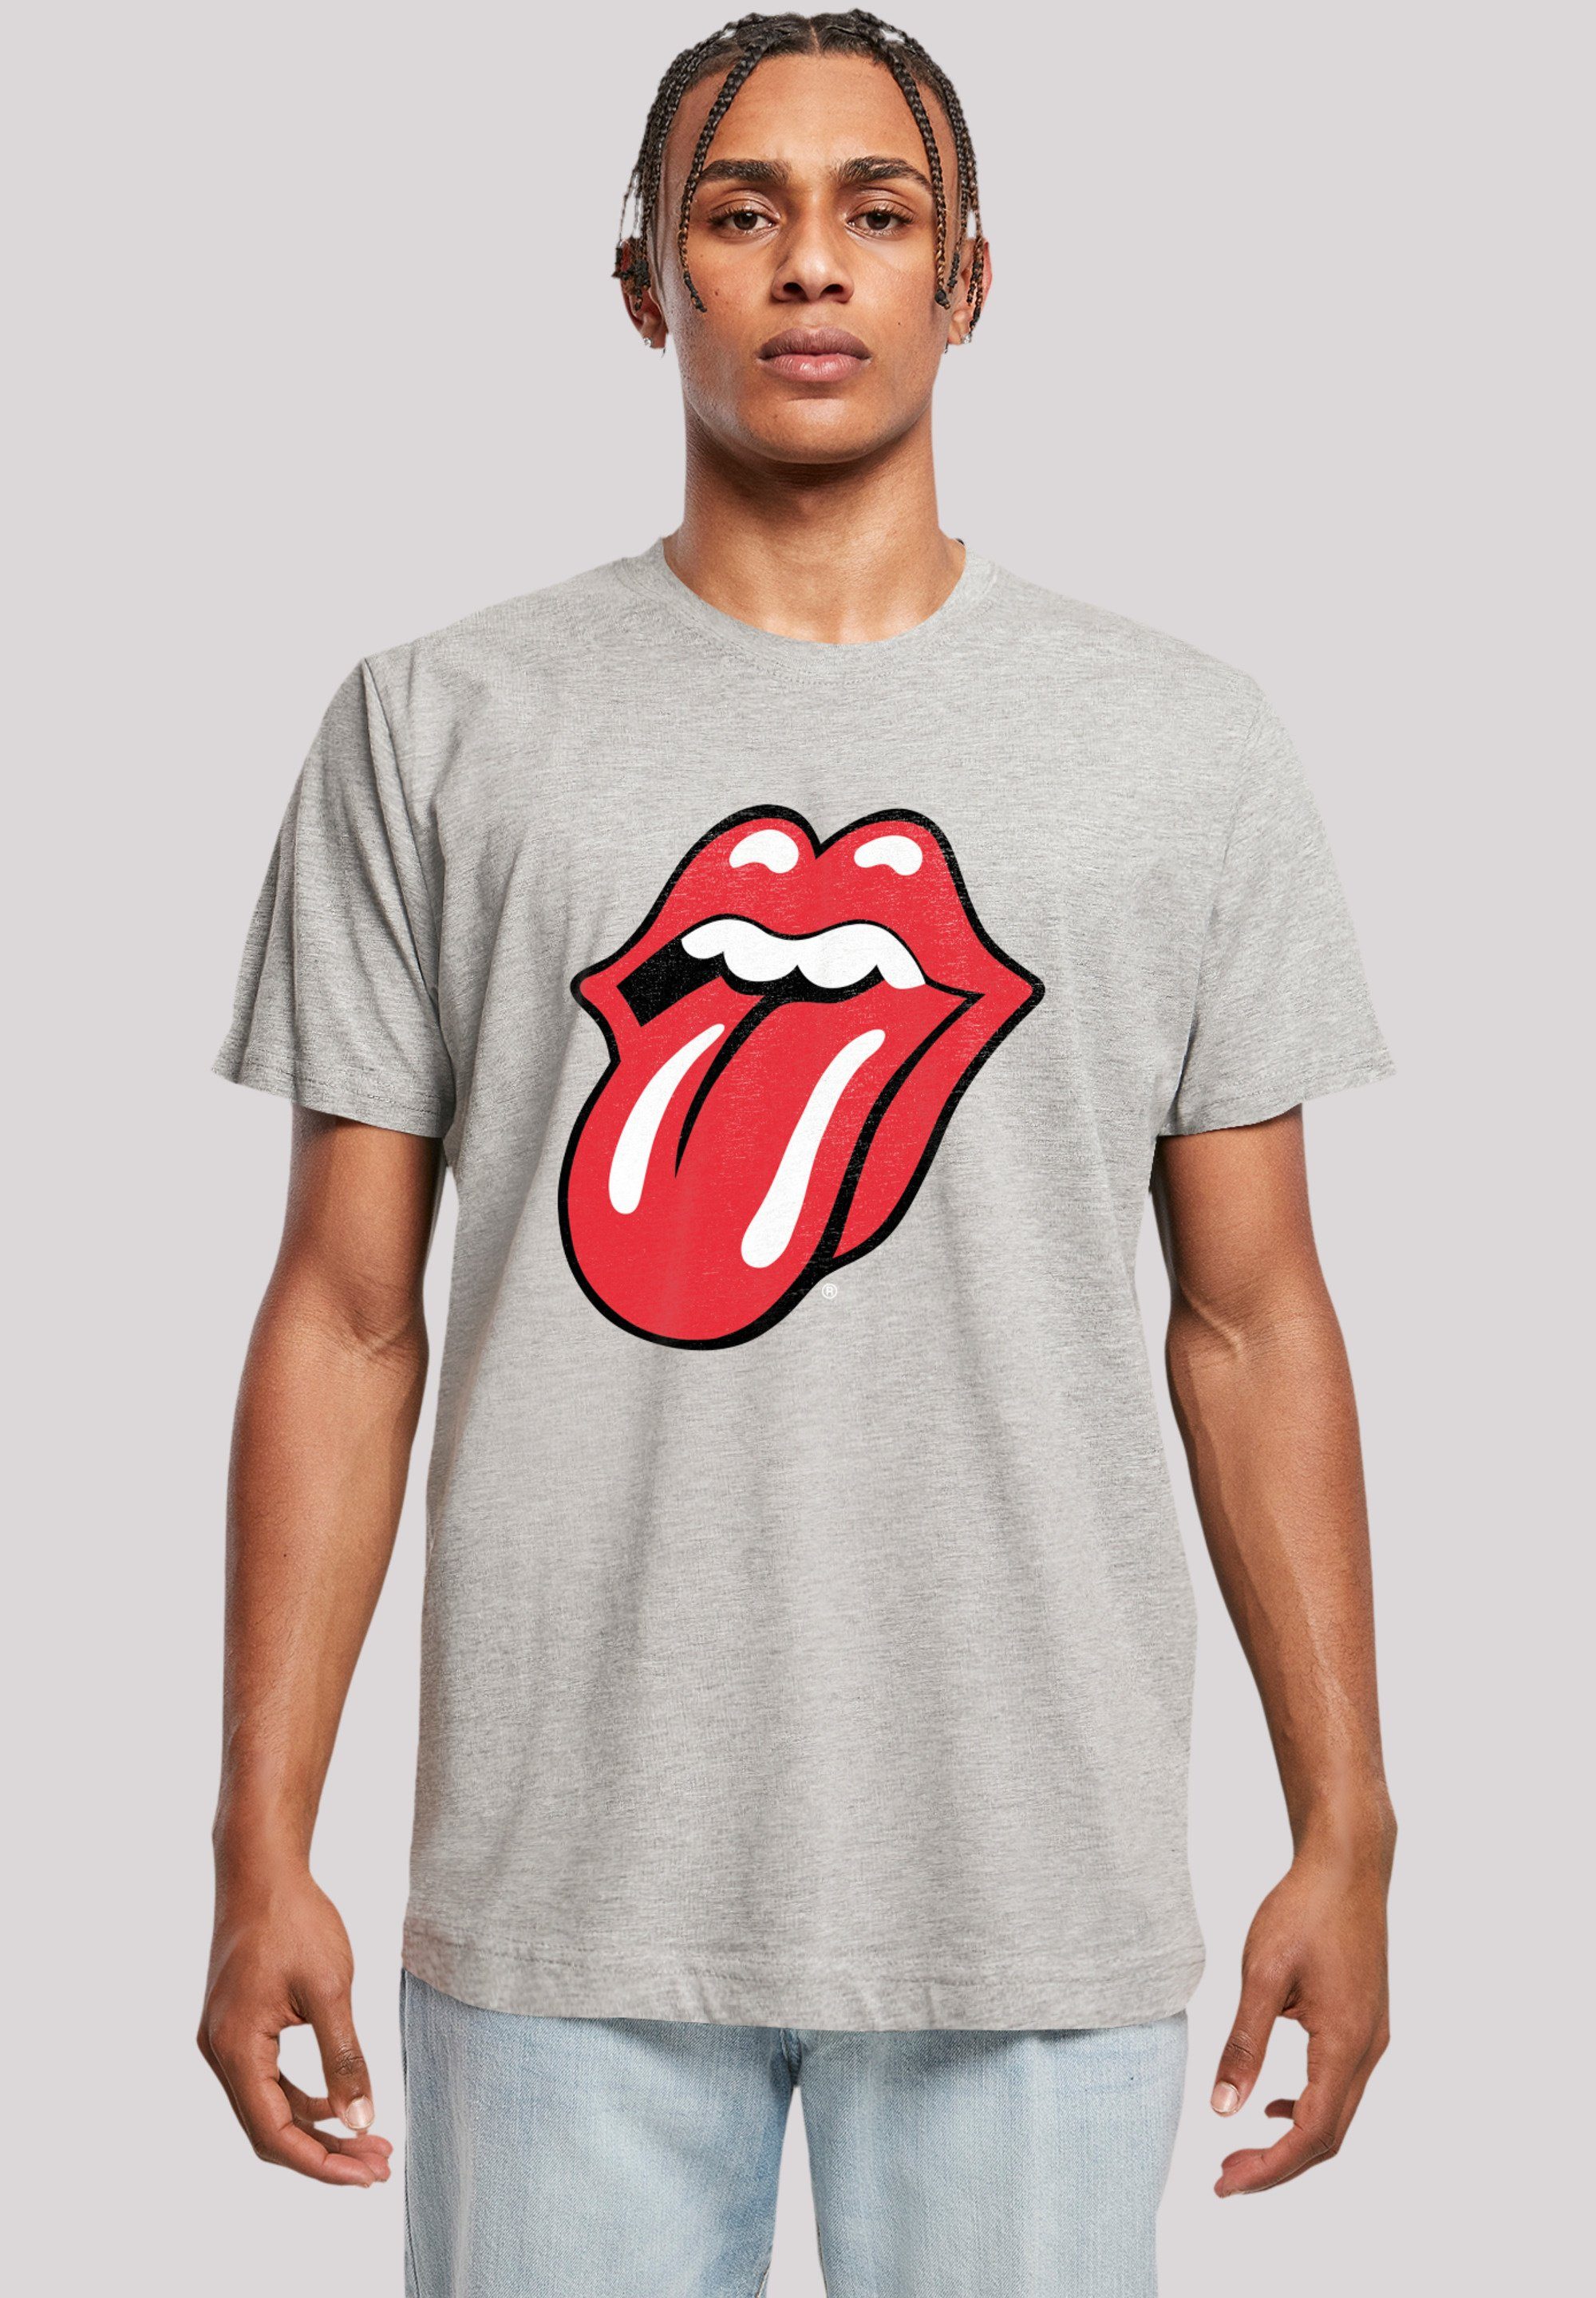 Stones T-Shirt F4NT4STIC lizenziertes The Offiziell The Rolling Print, Rolling T-Shirt Zunge Rote Stones